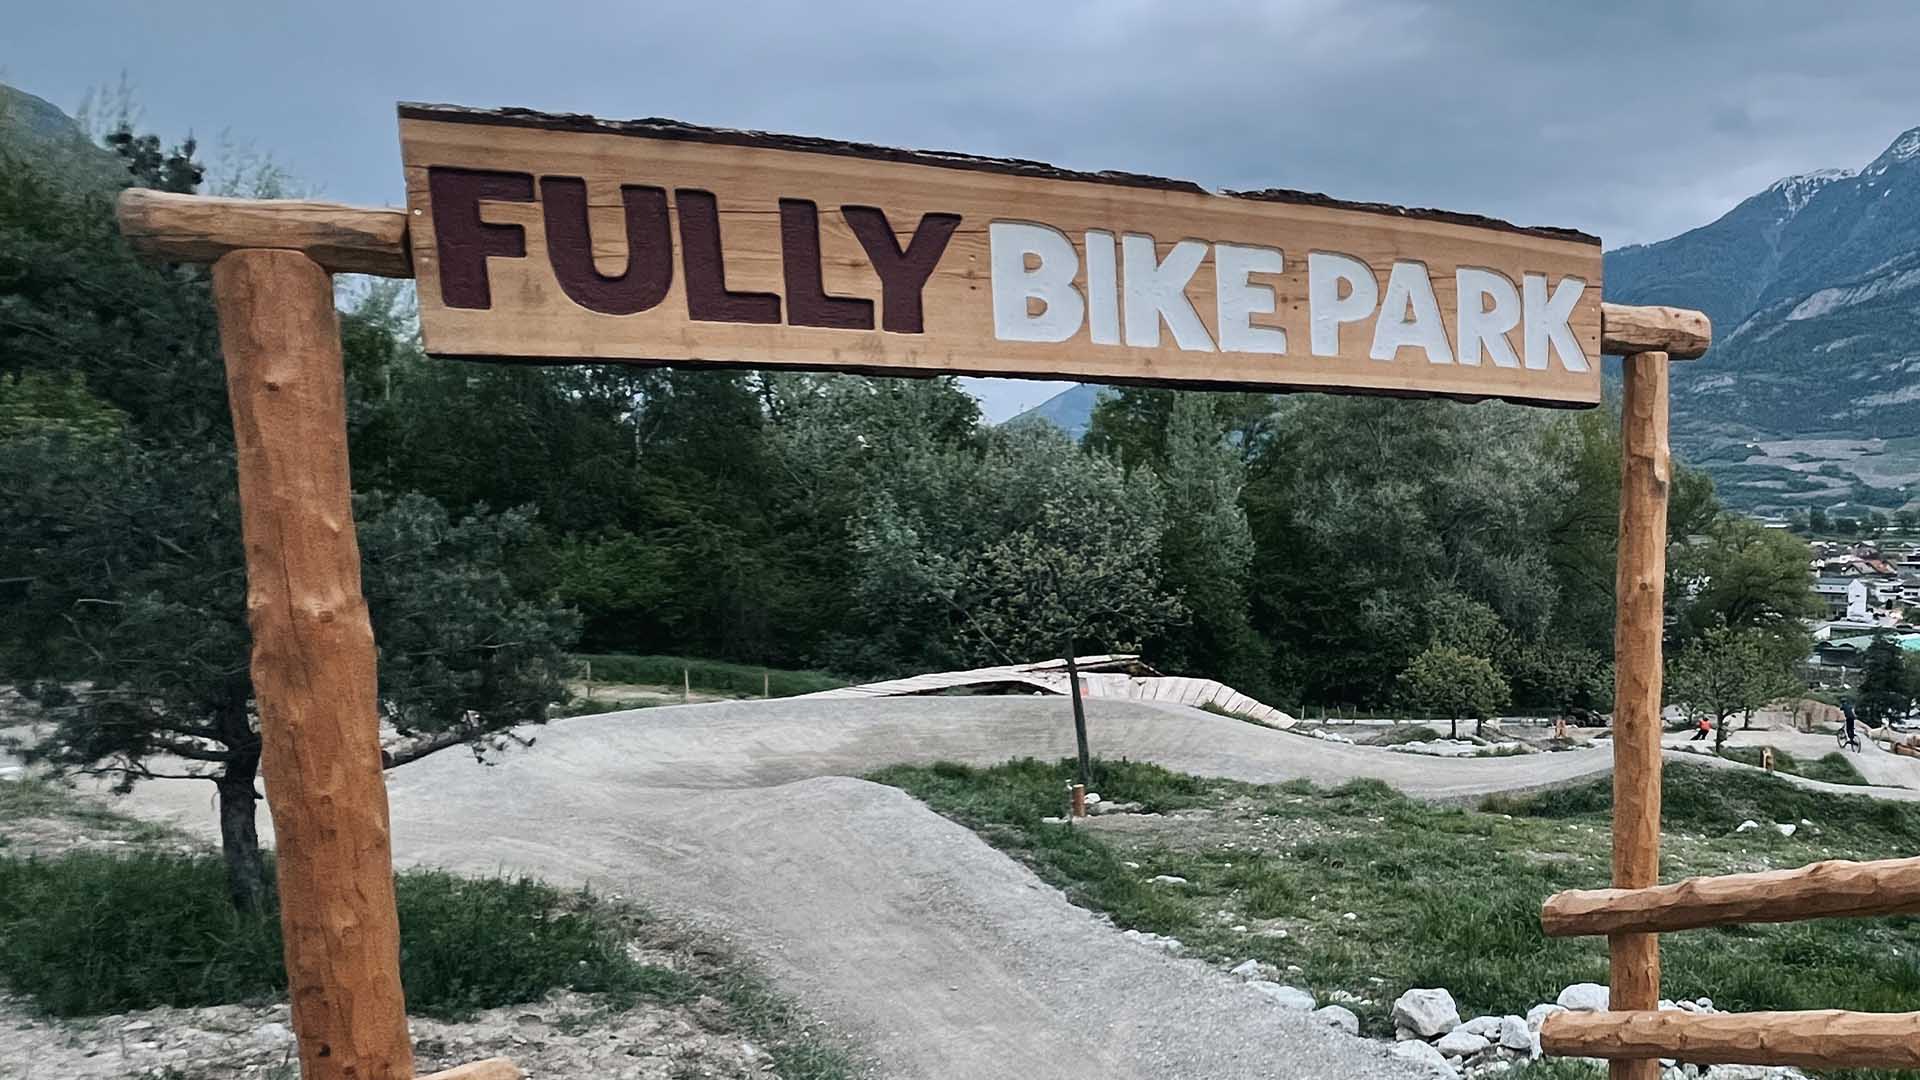 Bikepark de Fully: A new opportunity to take advantage of our mountain biking lessons